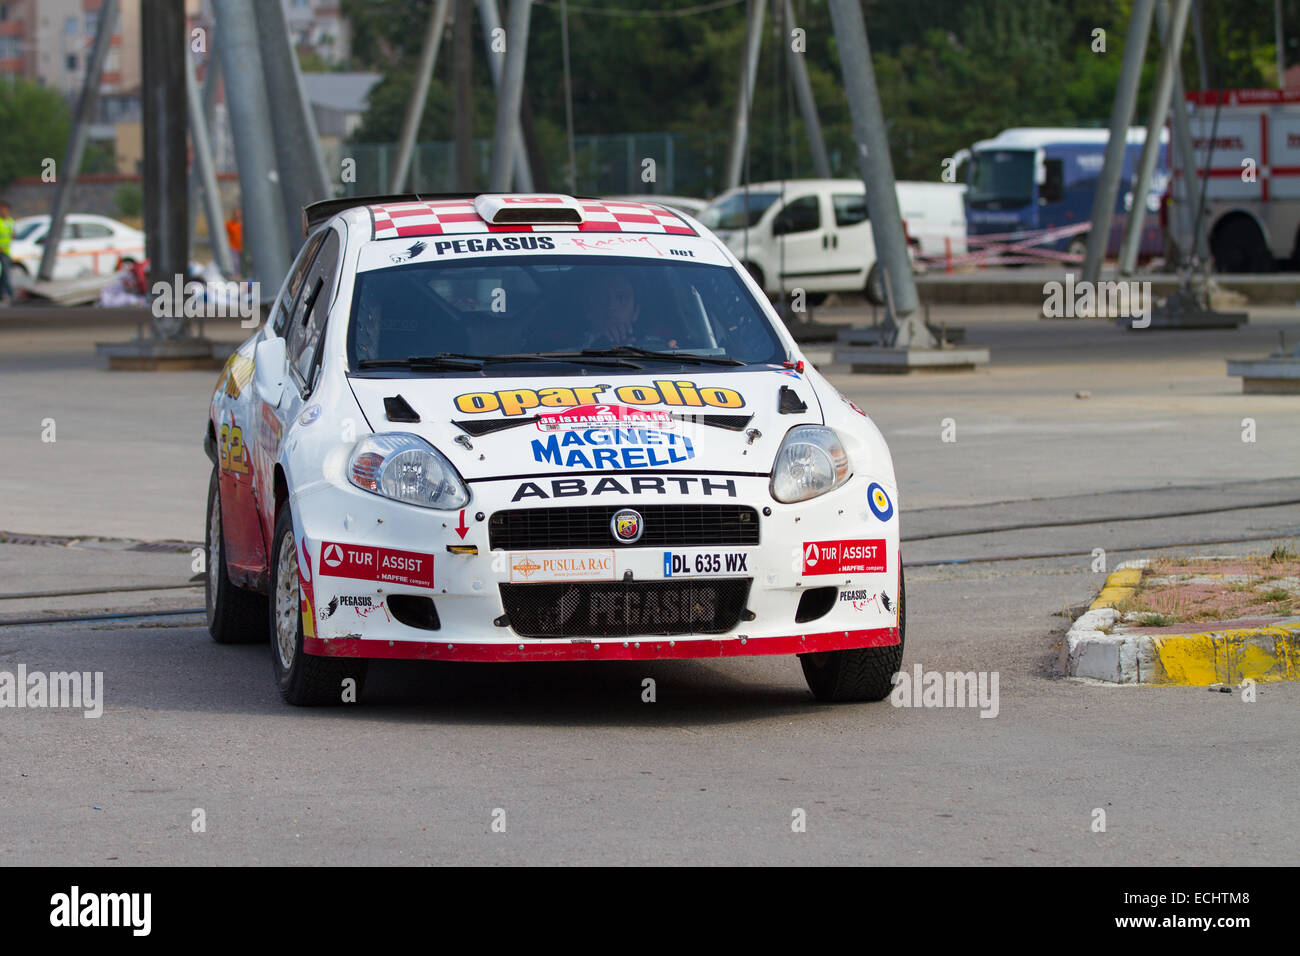 ISTANBUL, TURKEY - JULY 13, 2014: Fatih Kara with Fiat Grande Punto S2000  of Pegasus Racing Team in service area of 35. Istanbul Stock Photo - Alamy